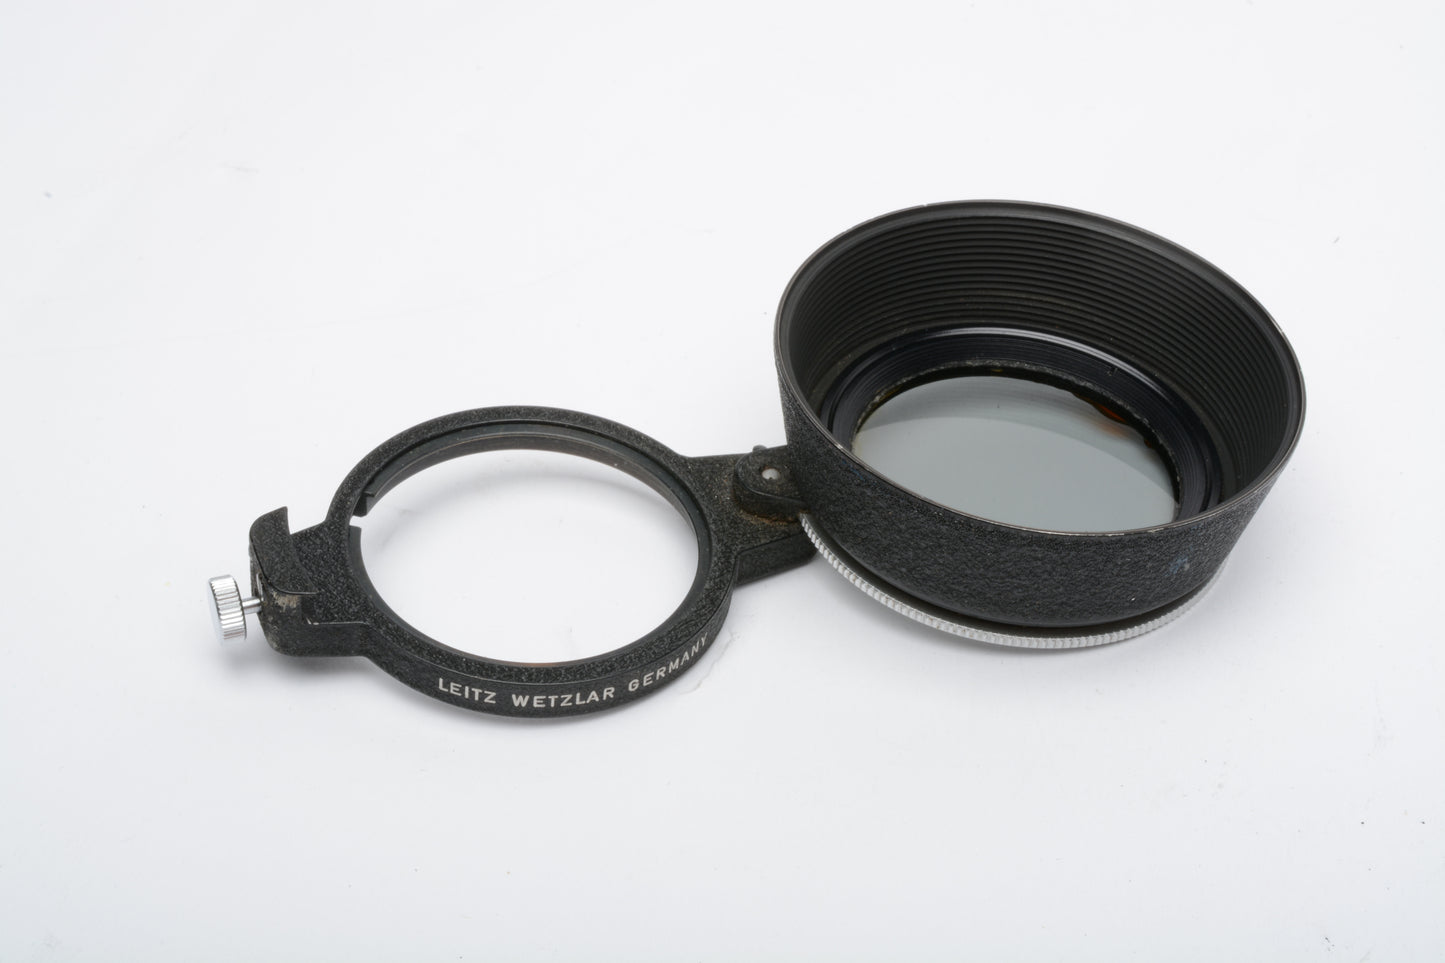 Leica 42mm Swing-Out Polarizing Filter 13352